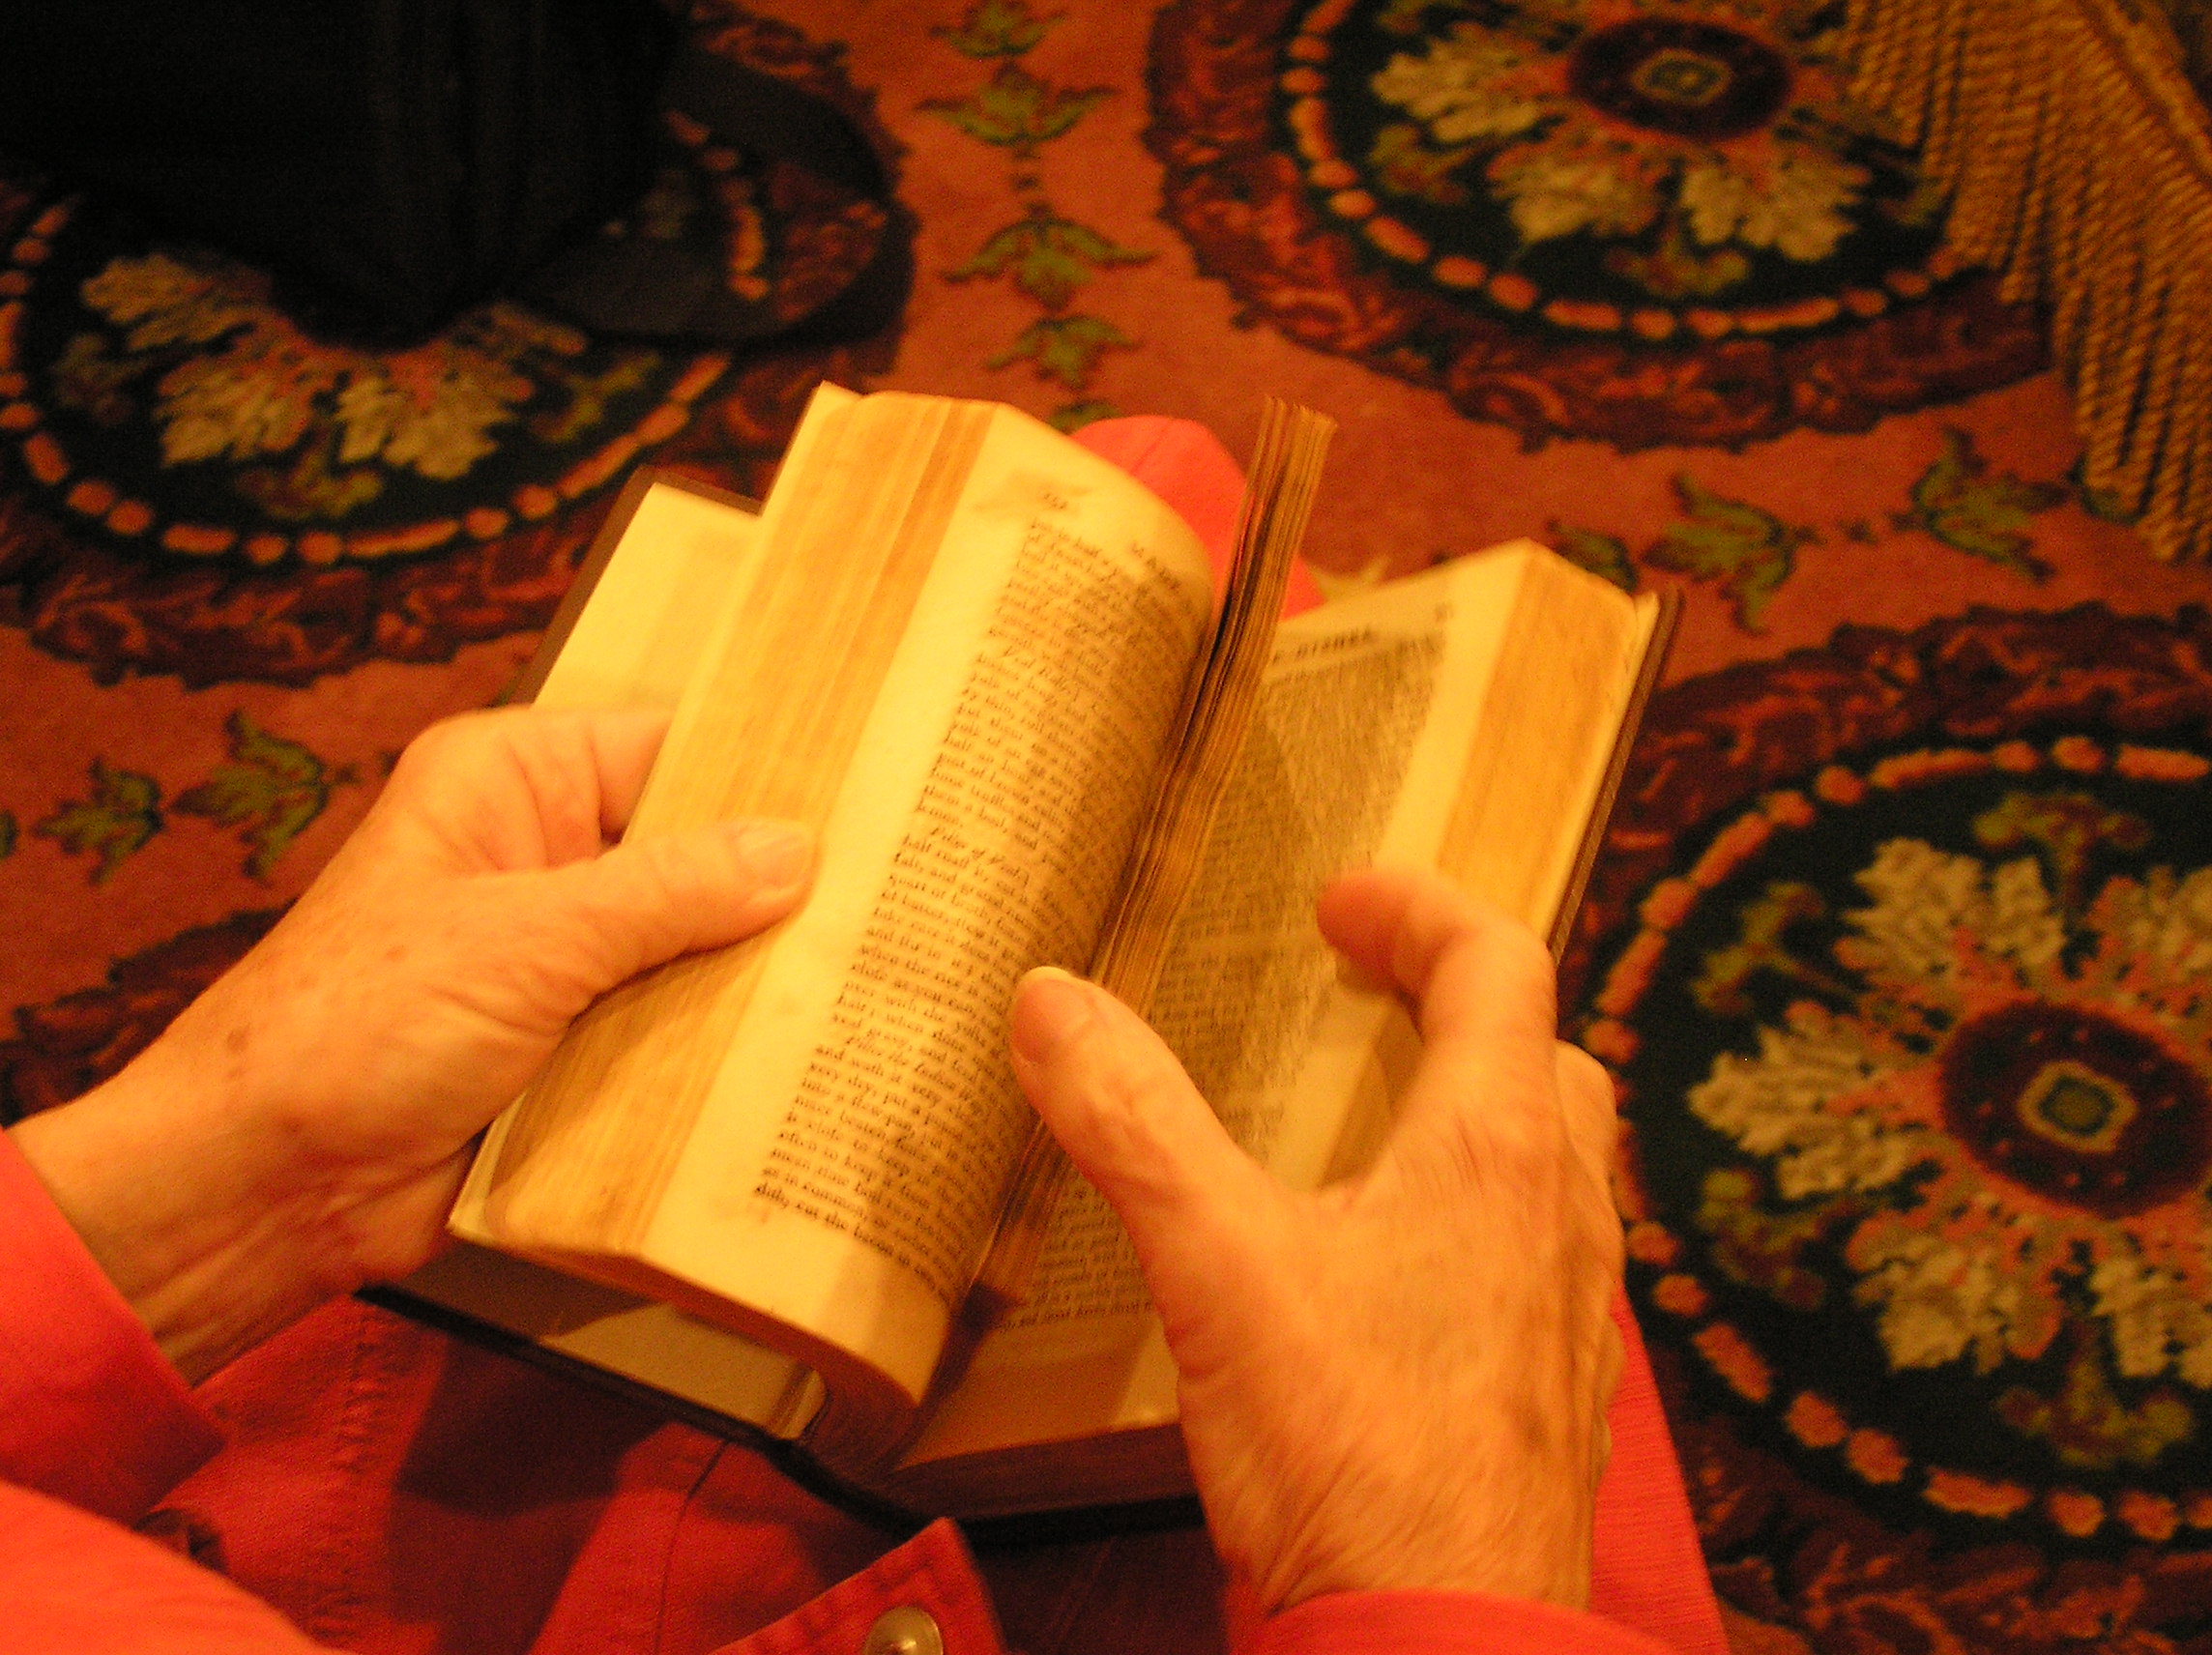 A member of the Peacock-Harper Friends holds a copy of <cite>The New Art of Cookery</cite> by Richard Briggs, published in 1798. This volume was added as the 3 millionth barcoded item in Virginia Tech's library collections in 2007.